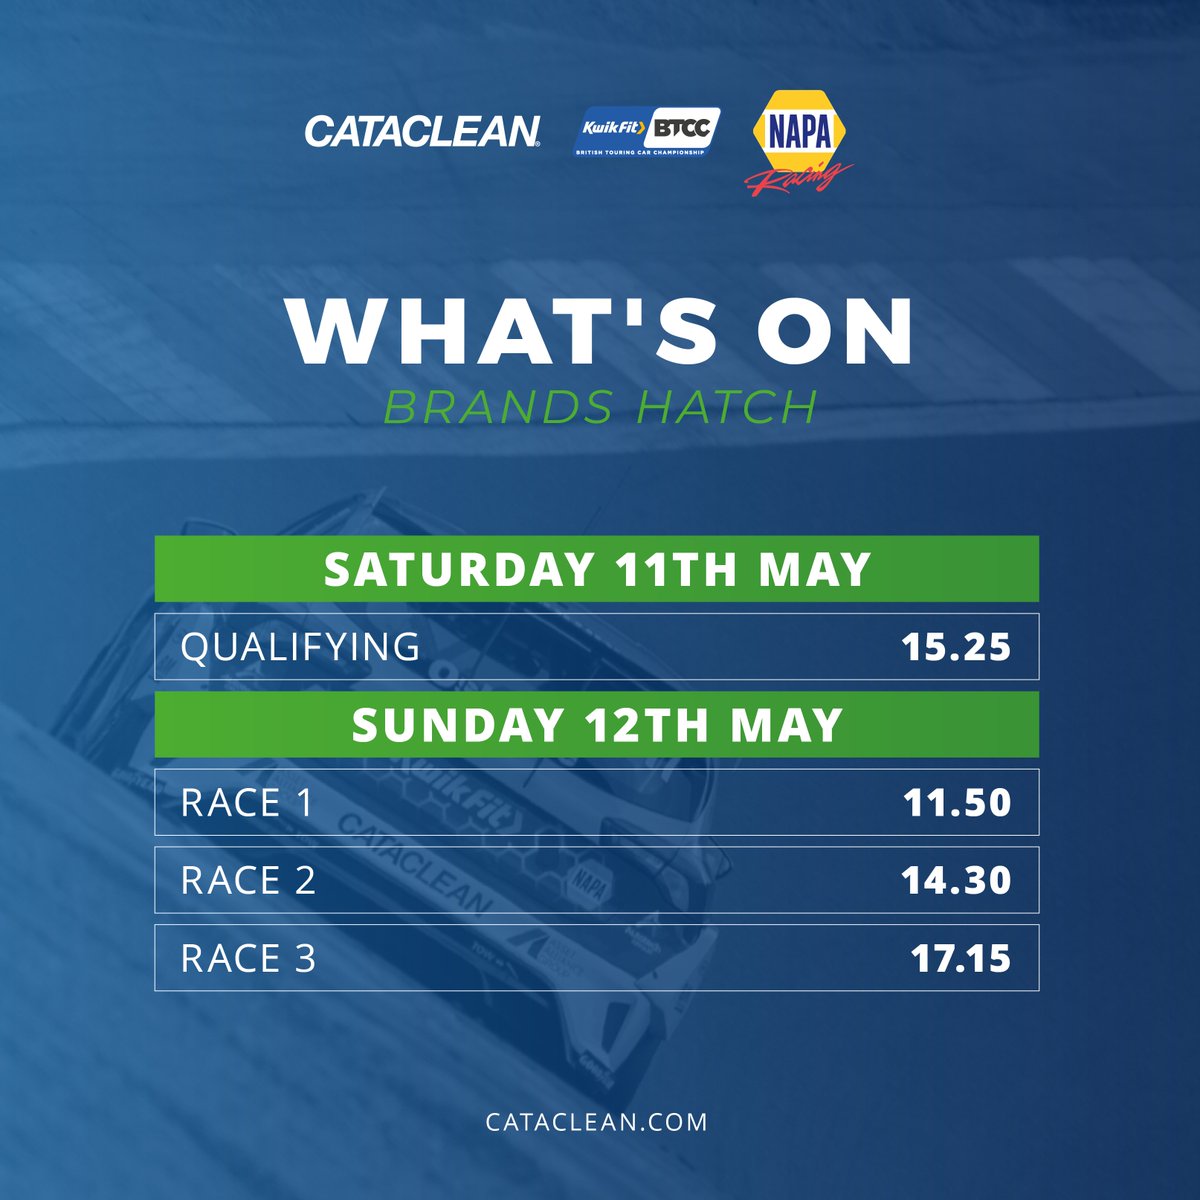 Here's your full weekend schedule, whether you plan to catch the action trackside or the comfort of your sofa! Tune in to ITV4 this Sunday for live coverage 📺 #Cataclean #NAPARacingUK #BTCC